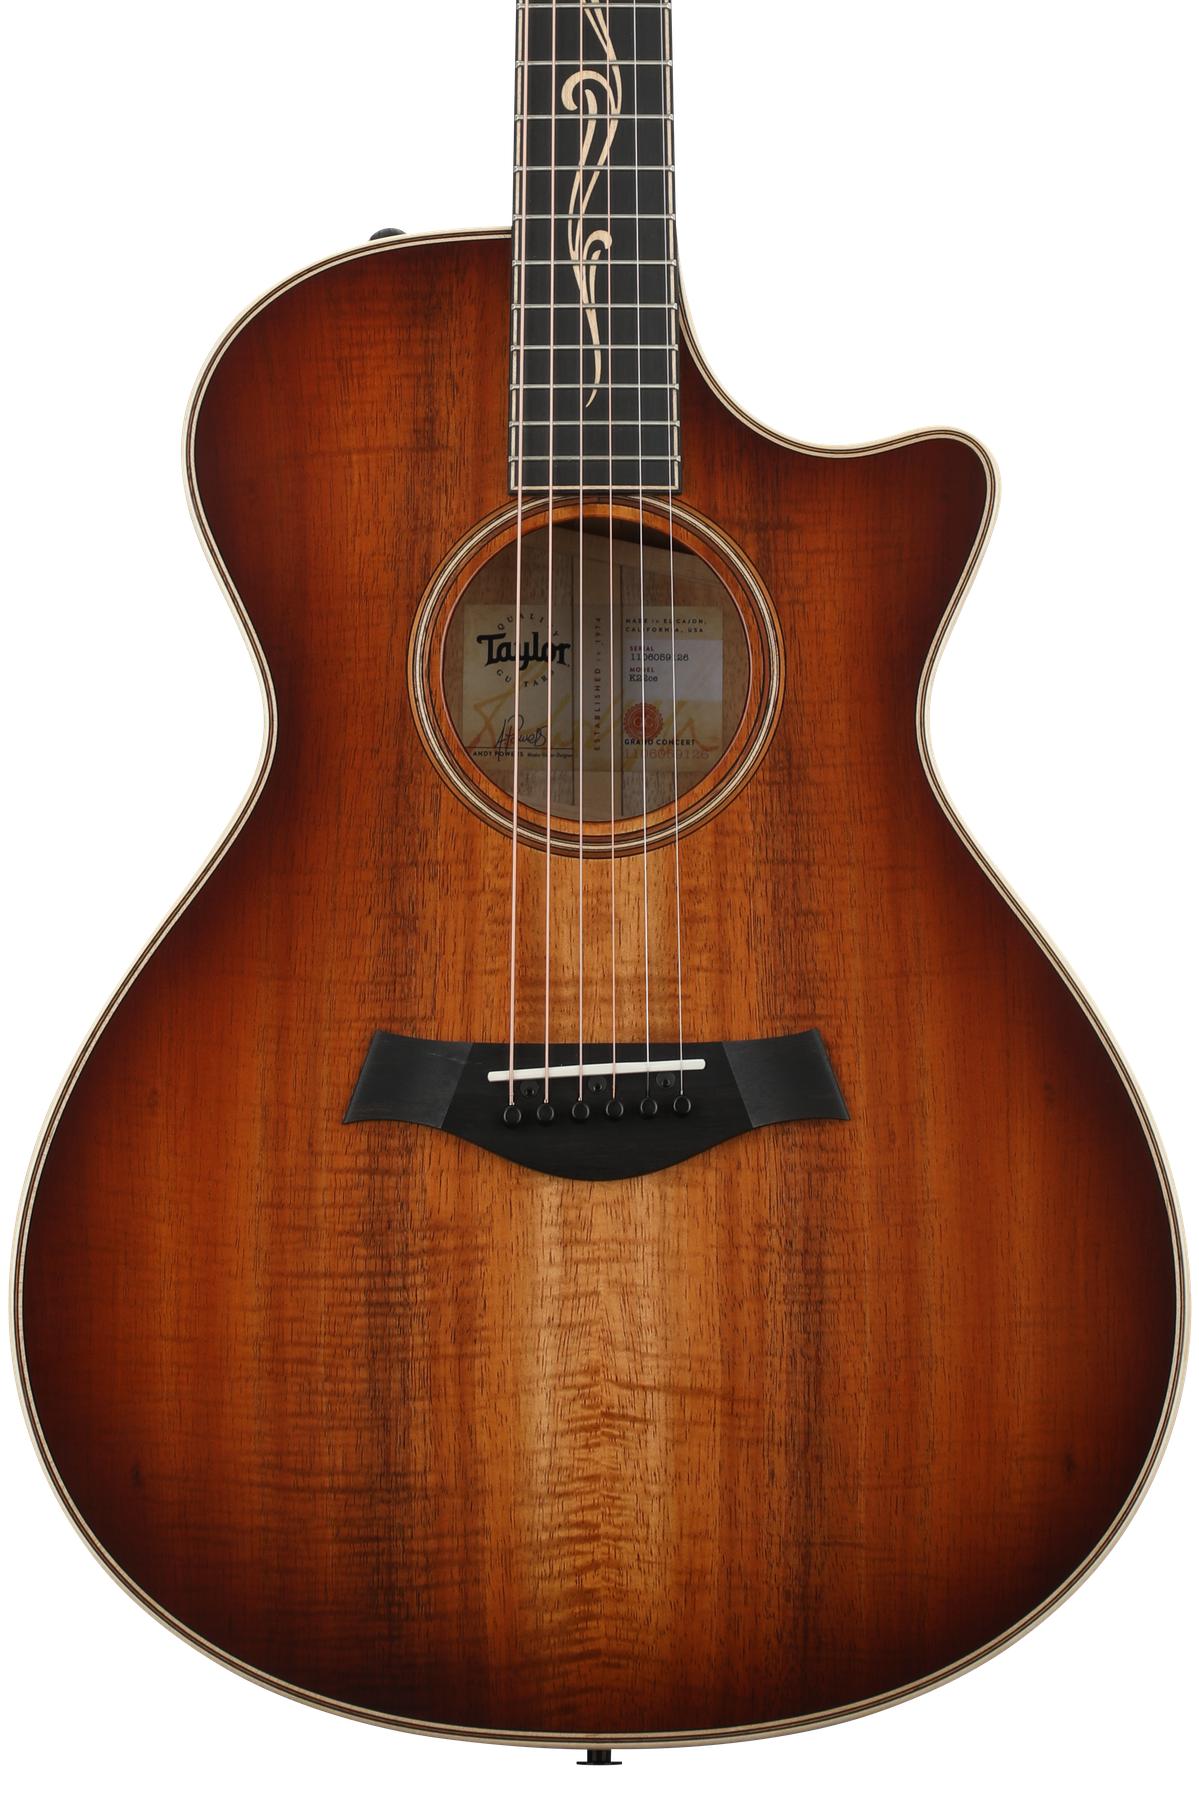 Taylor K22ce V-Class Acoustic-electric Guitar - Shaded Edgeburst